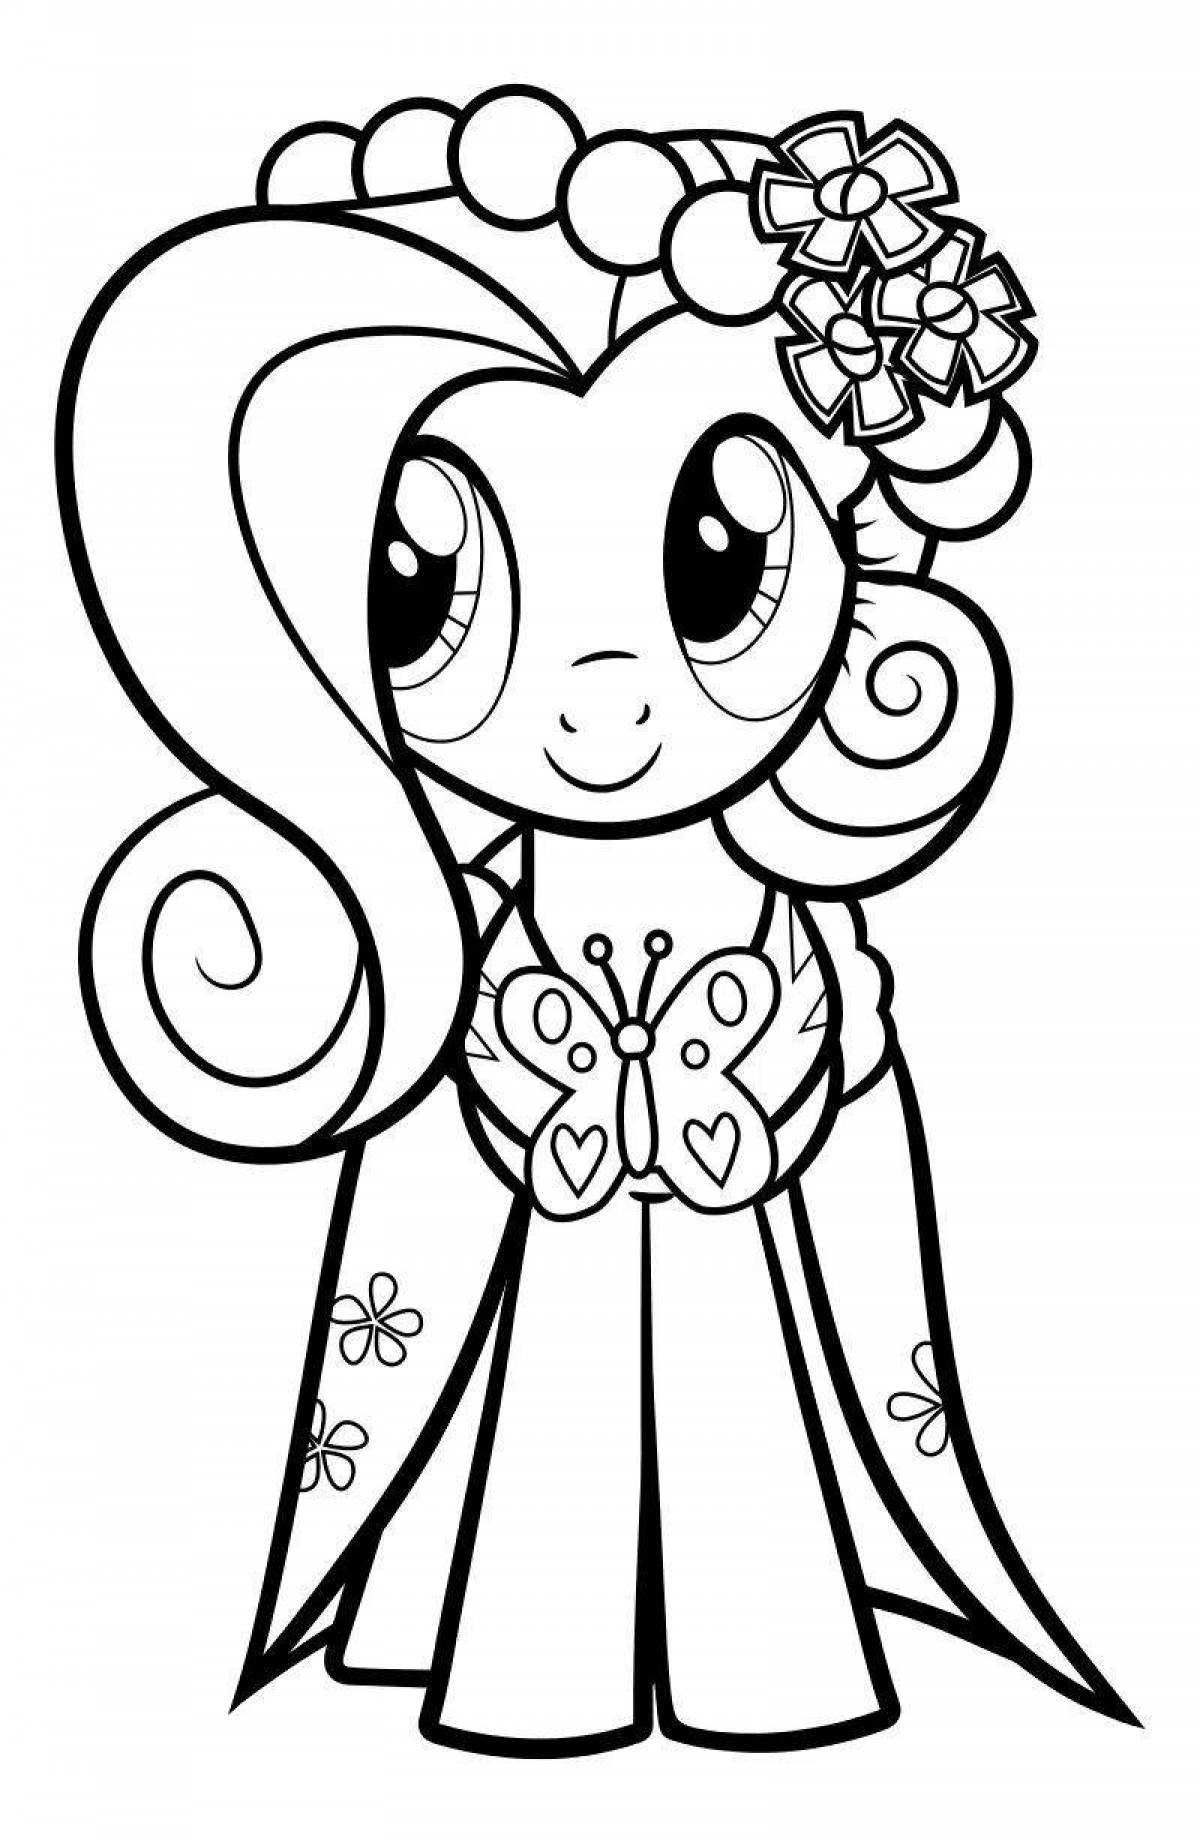 Elegant pony coloring in a dress